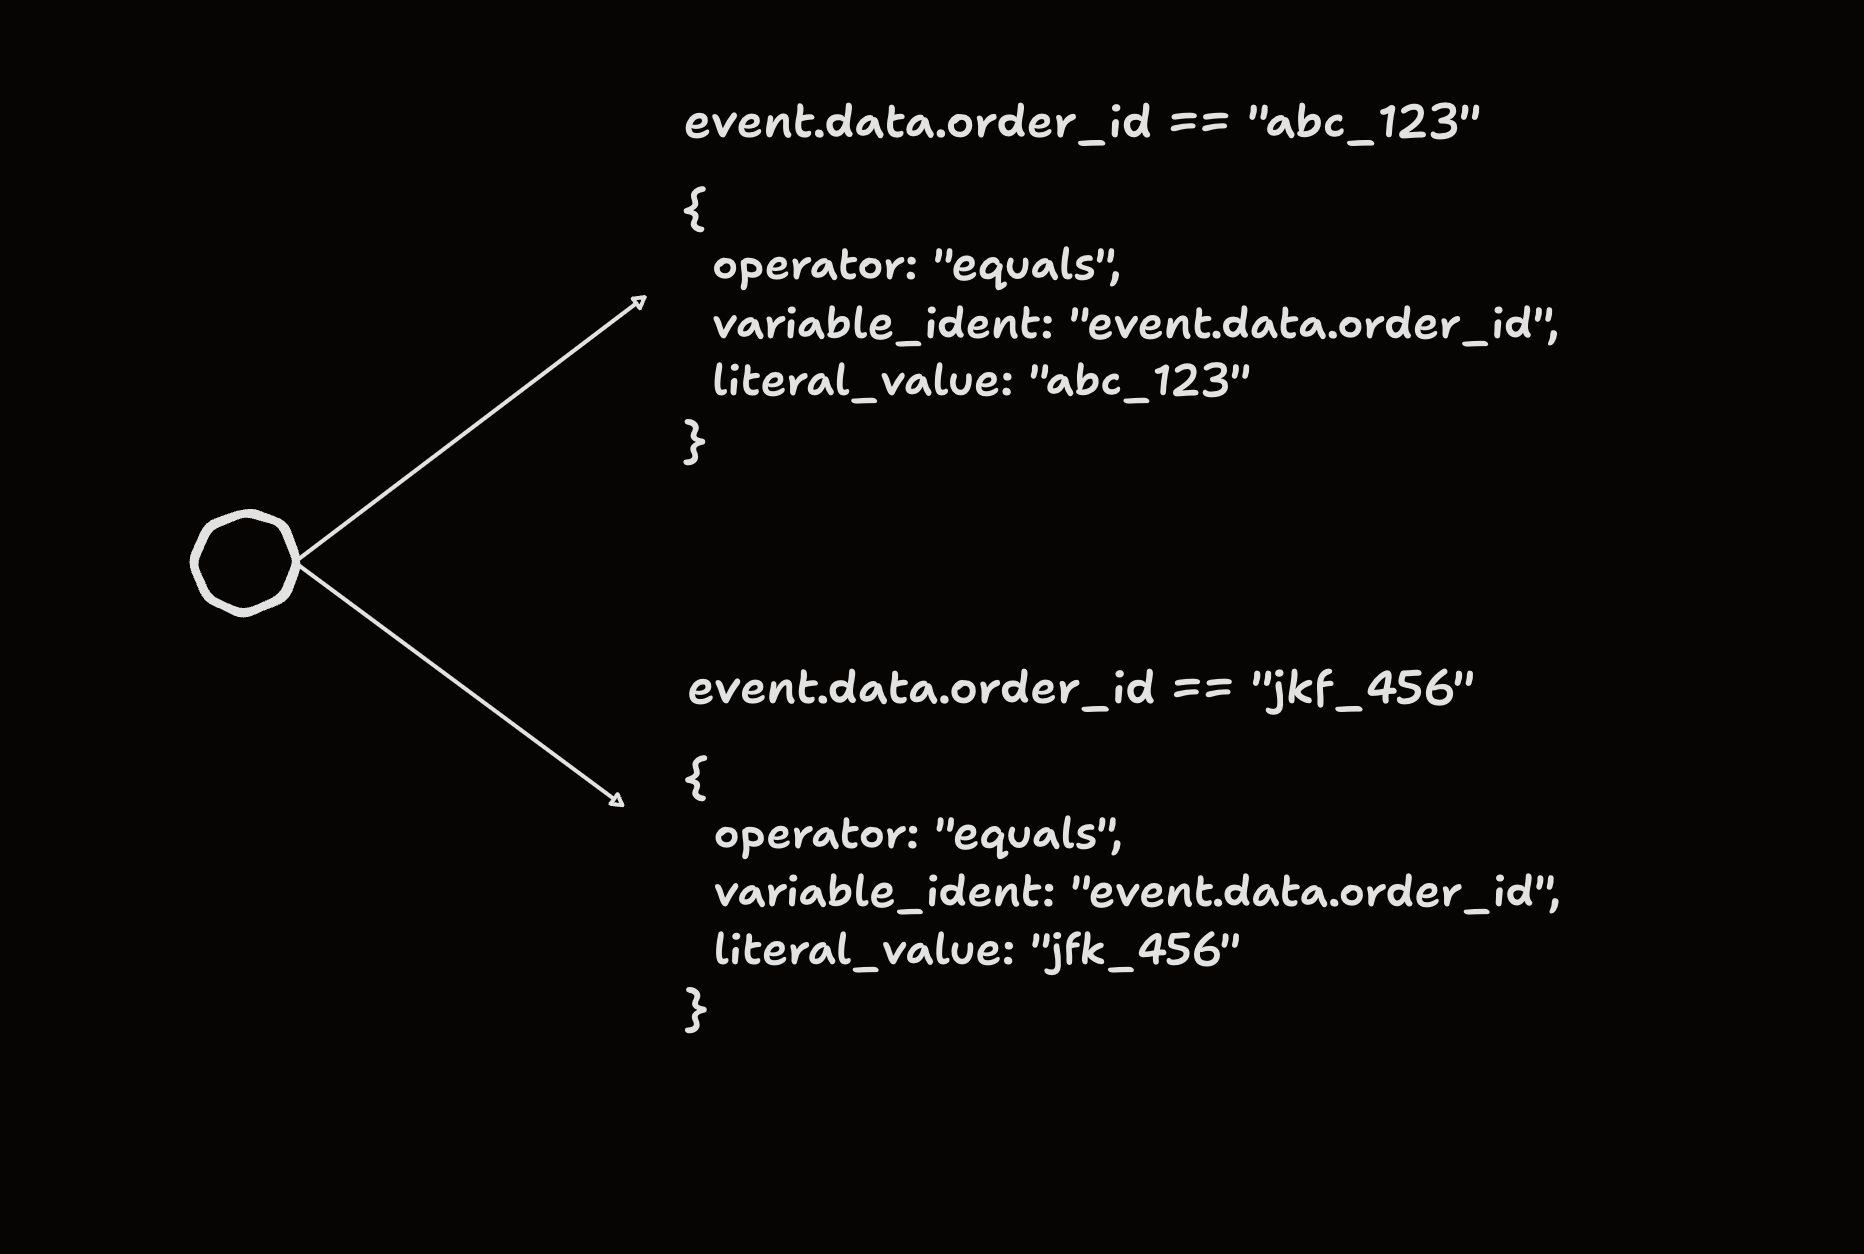 Diagram showing a conditional check and its representation in a structured format. The condition 'event.data.order_id == abc_123' is translated to a structured format with operator: 'equals', variable_ident: 'event.data.order_id', and literal_value: 'abc_123'. The second condition is 'event.data.order_id == jkf_456'. The diagram connects these two representations with arrows, indicating the relationship between the original condition and its structured format.